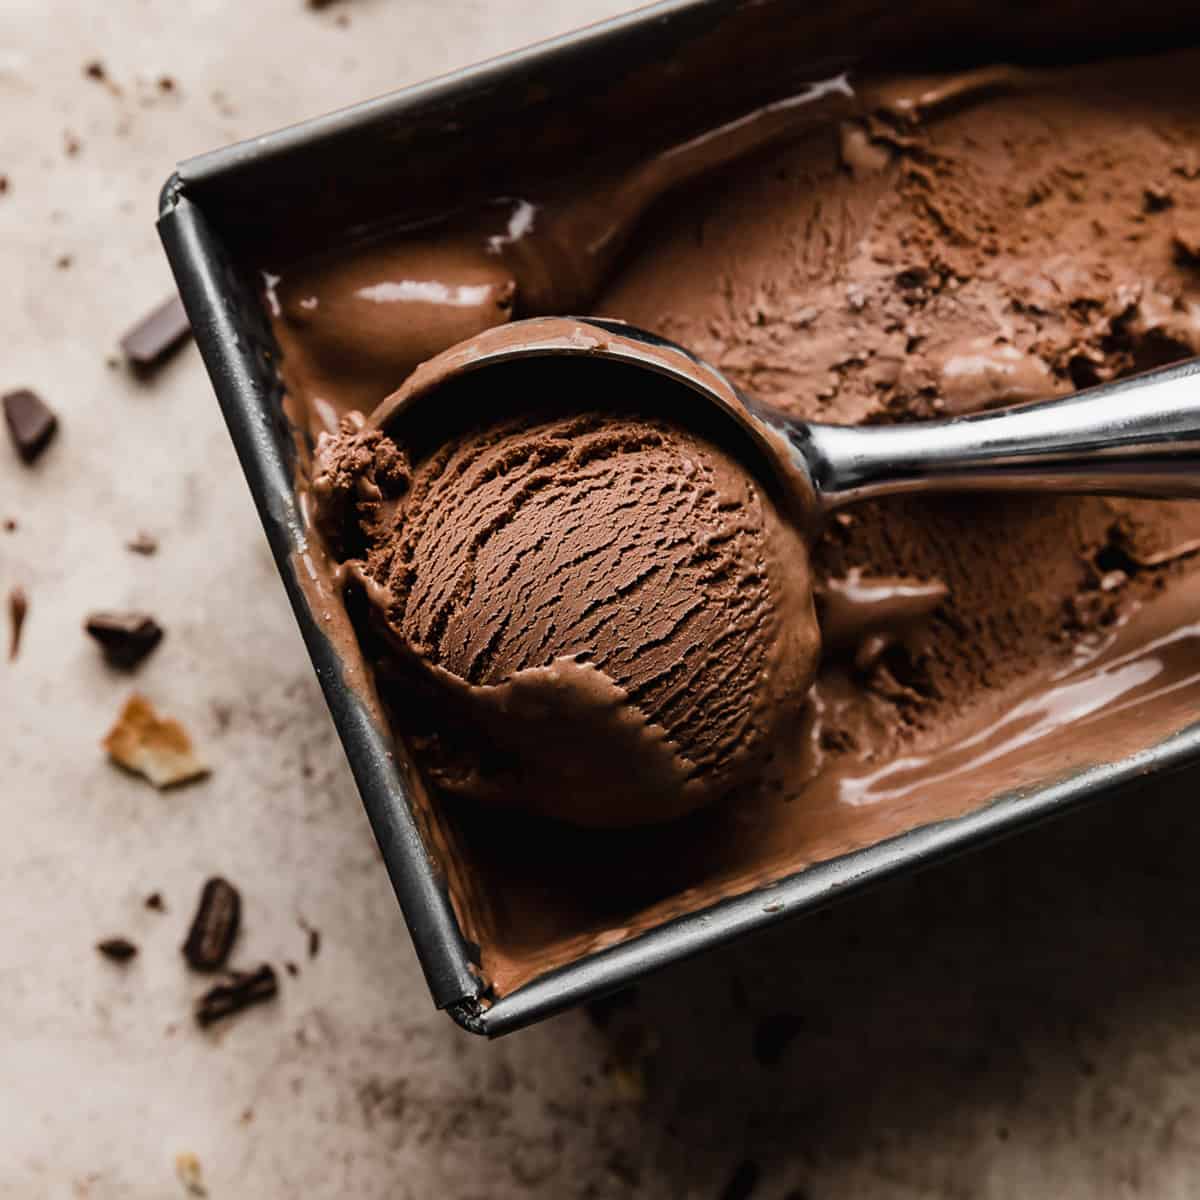 Why Ice Cream Melts Quickly on a Hot Day